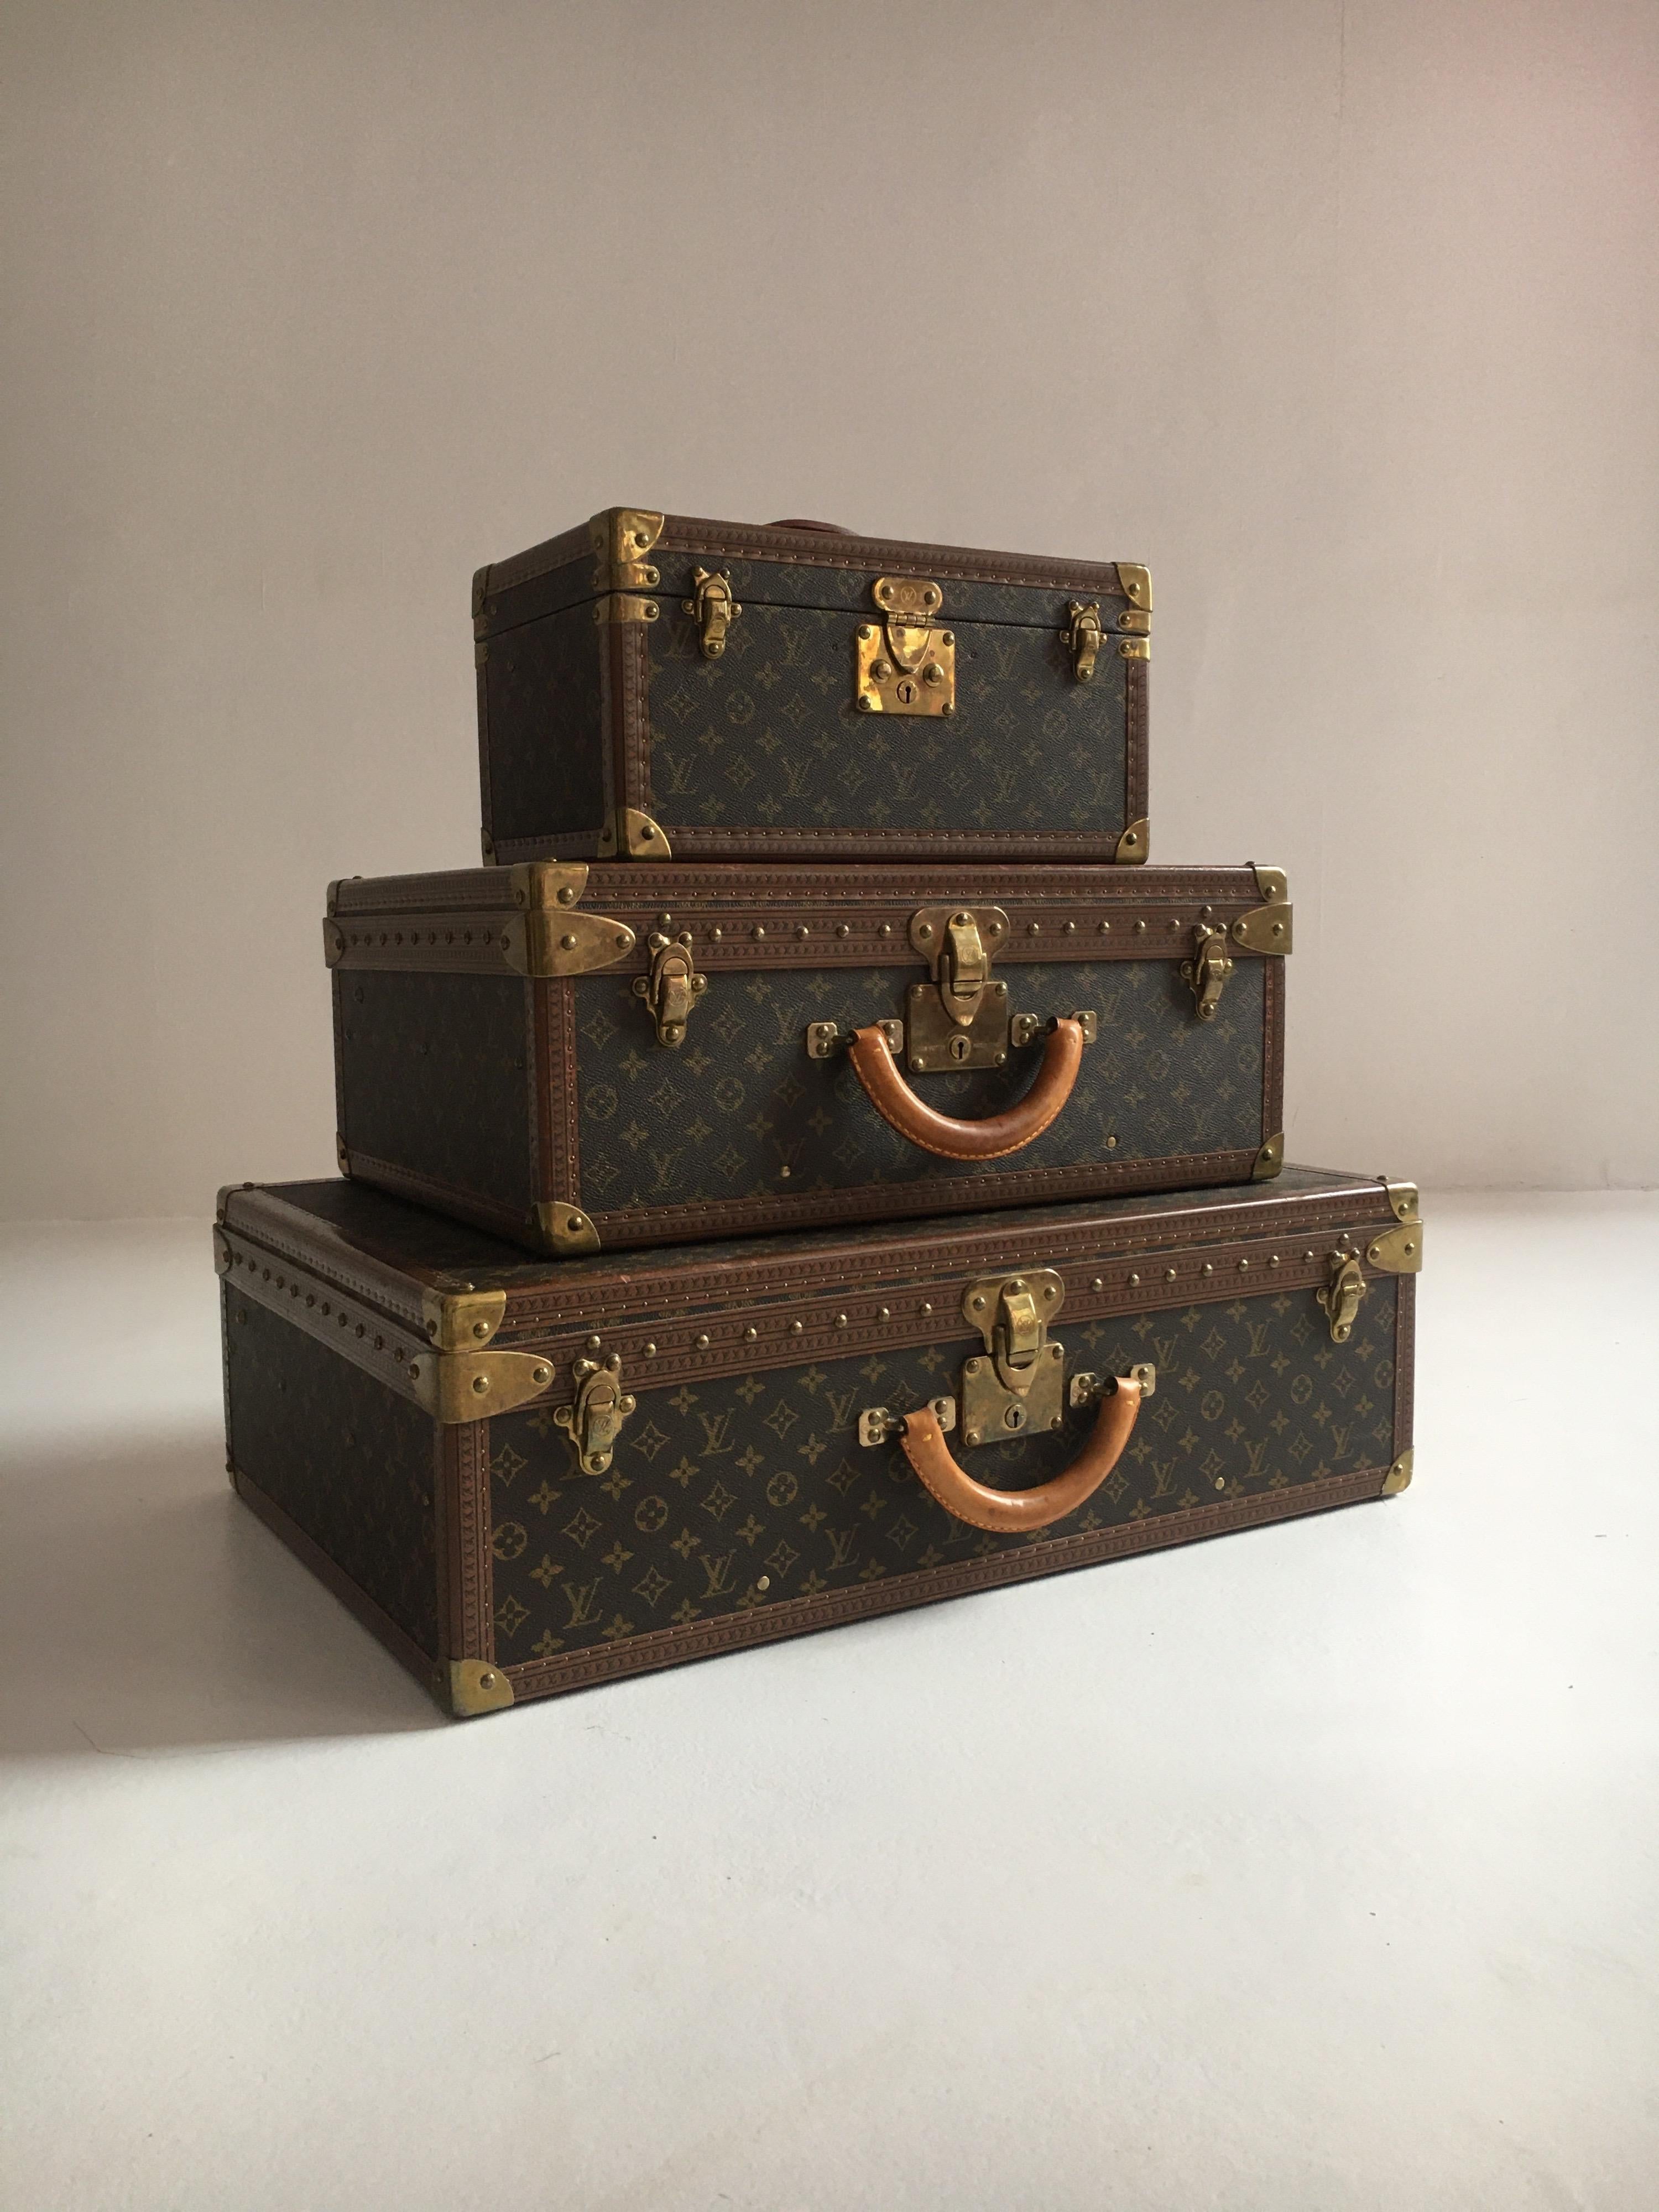 Louis Vuitton vintage petite Eifel Tower Stack Alzer Trunks set of three, France, 1970s. Alzer 70, Alzer 55 and the famous train case, in one beautiful set in gently used vintage condition.